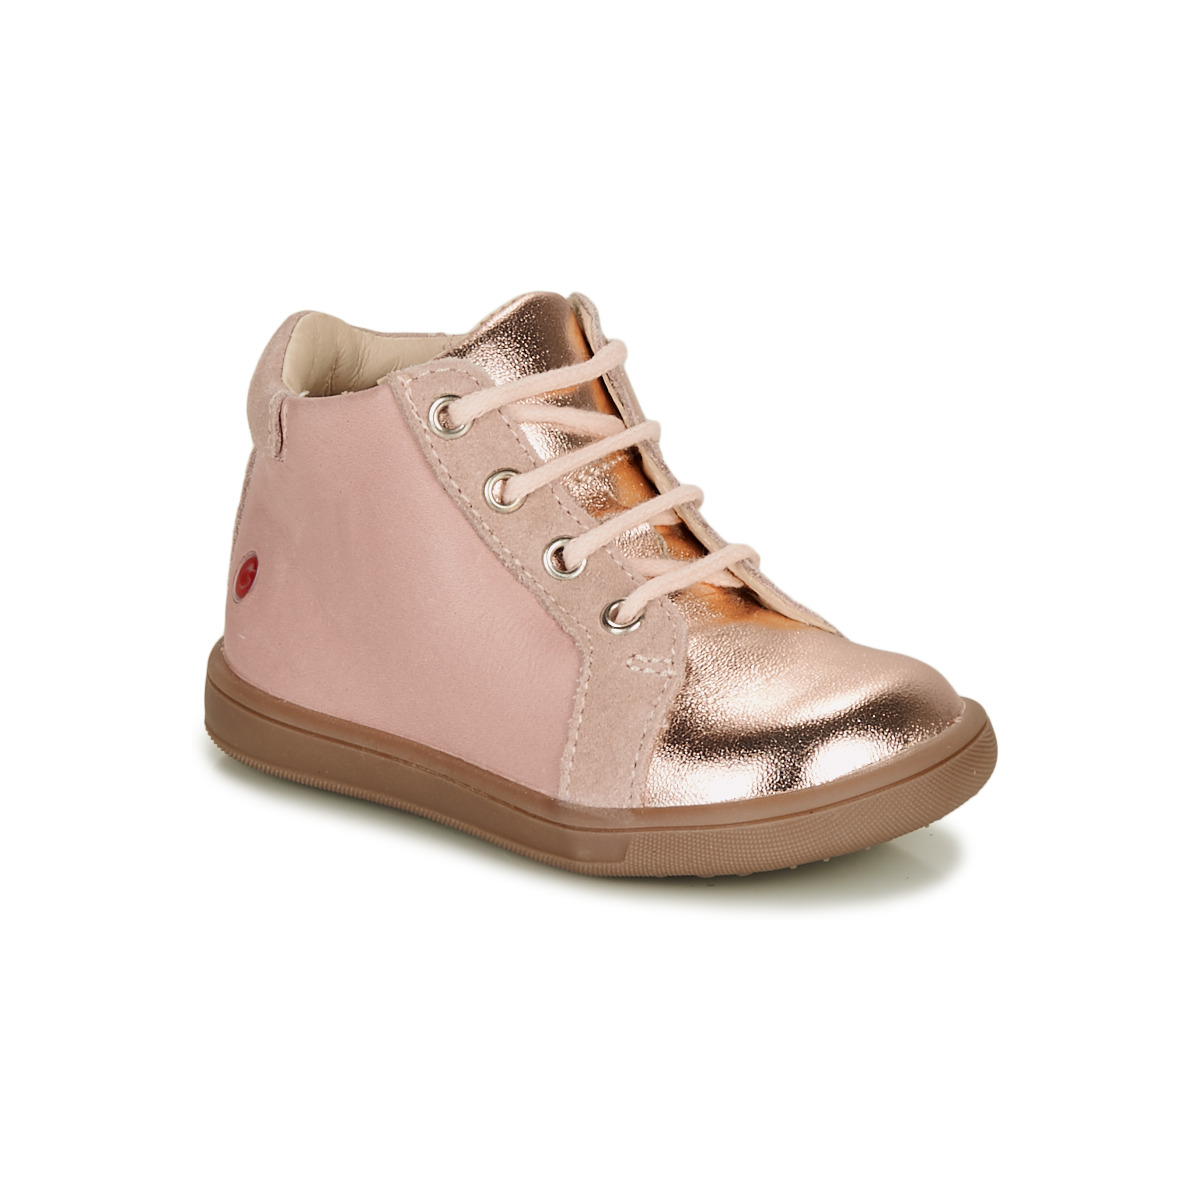 Chaussures Fille Melvin & Hamilto FAMIA Rose